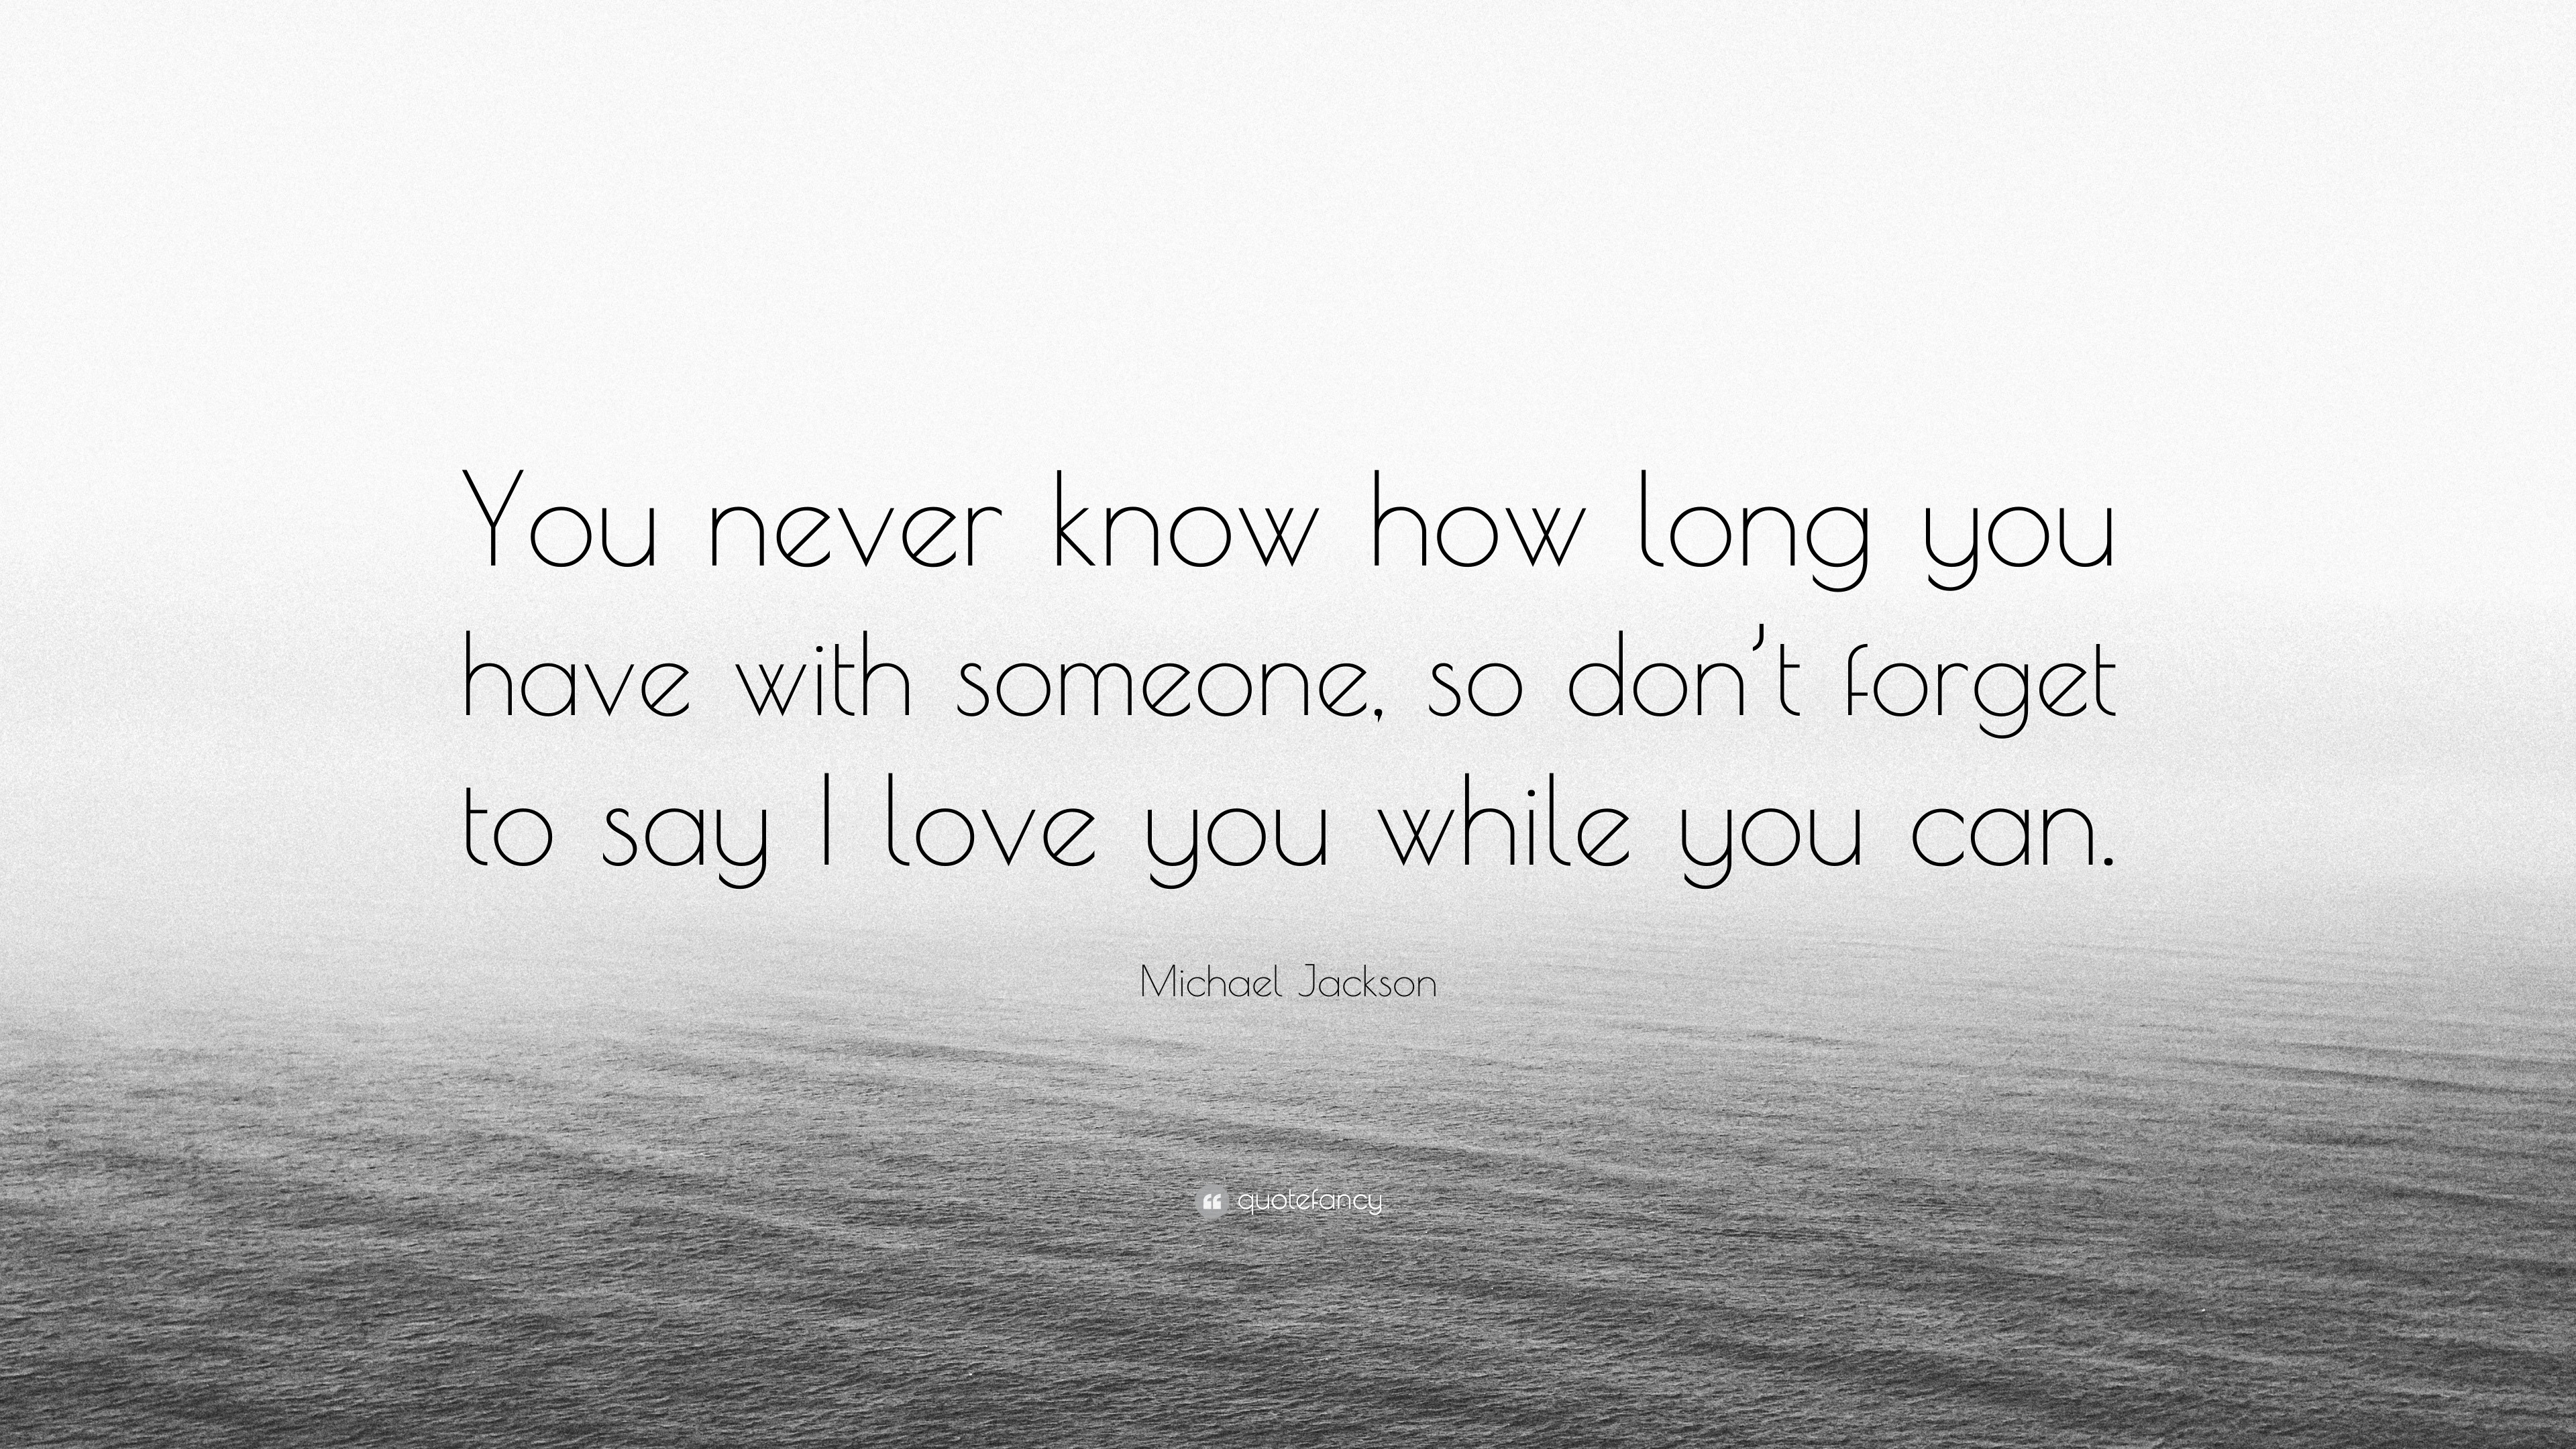 Michael Jackson Quote You Never Know How Long You Have With Someone So Don T Forget